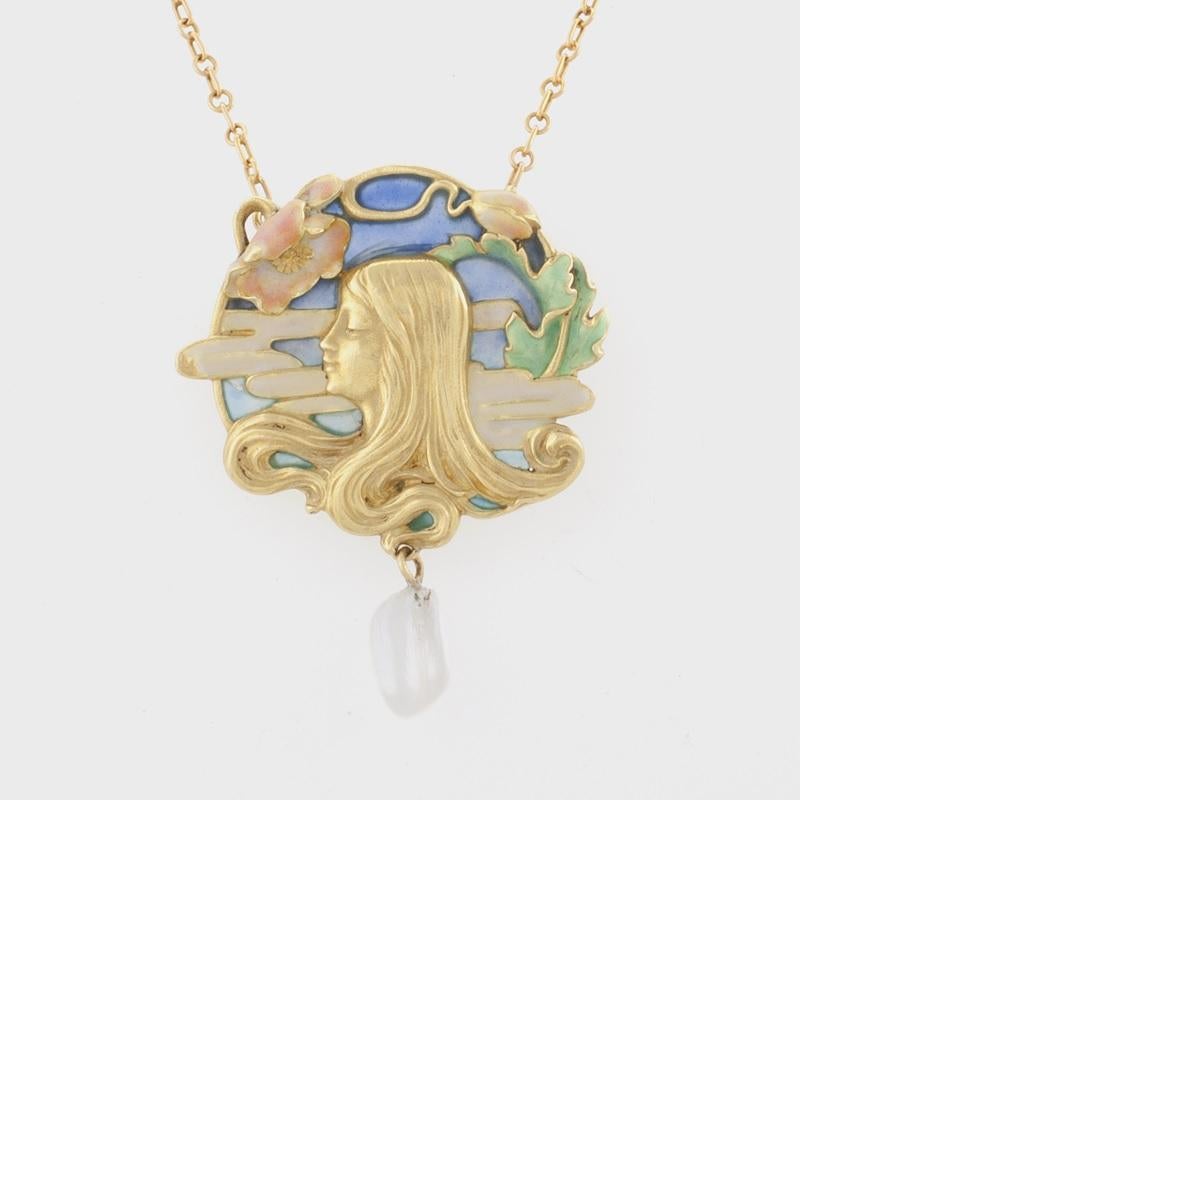 A French Art Nouveau 18 karat gold pendant/brooch with freshwater pearl drop and plique-à-jour enamel, depicting a maiden in profile against  a sky with clouds and framed with pink poppy blossoms by Louis Zorra.  The serpentine clouds, the woman's